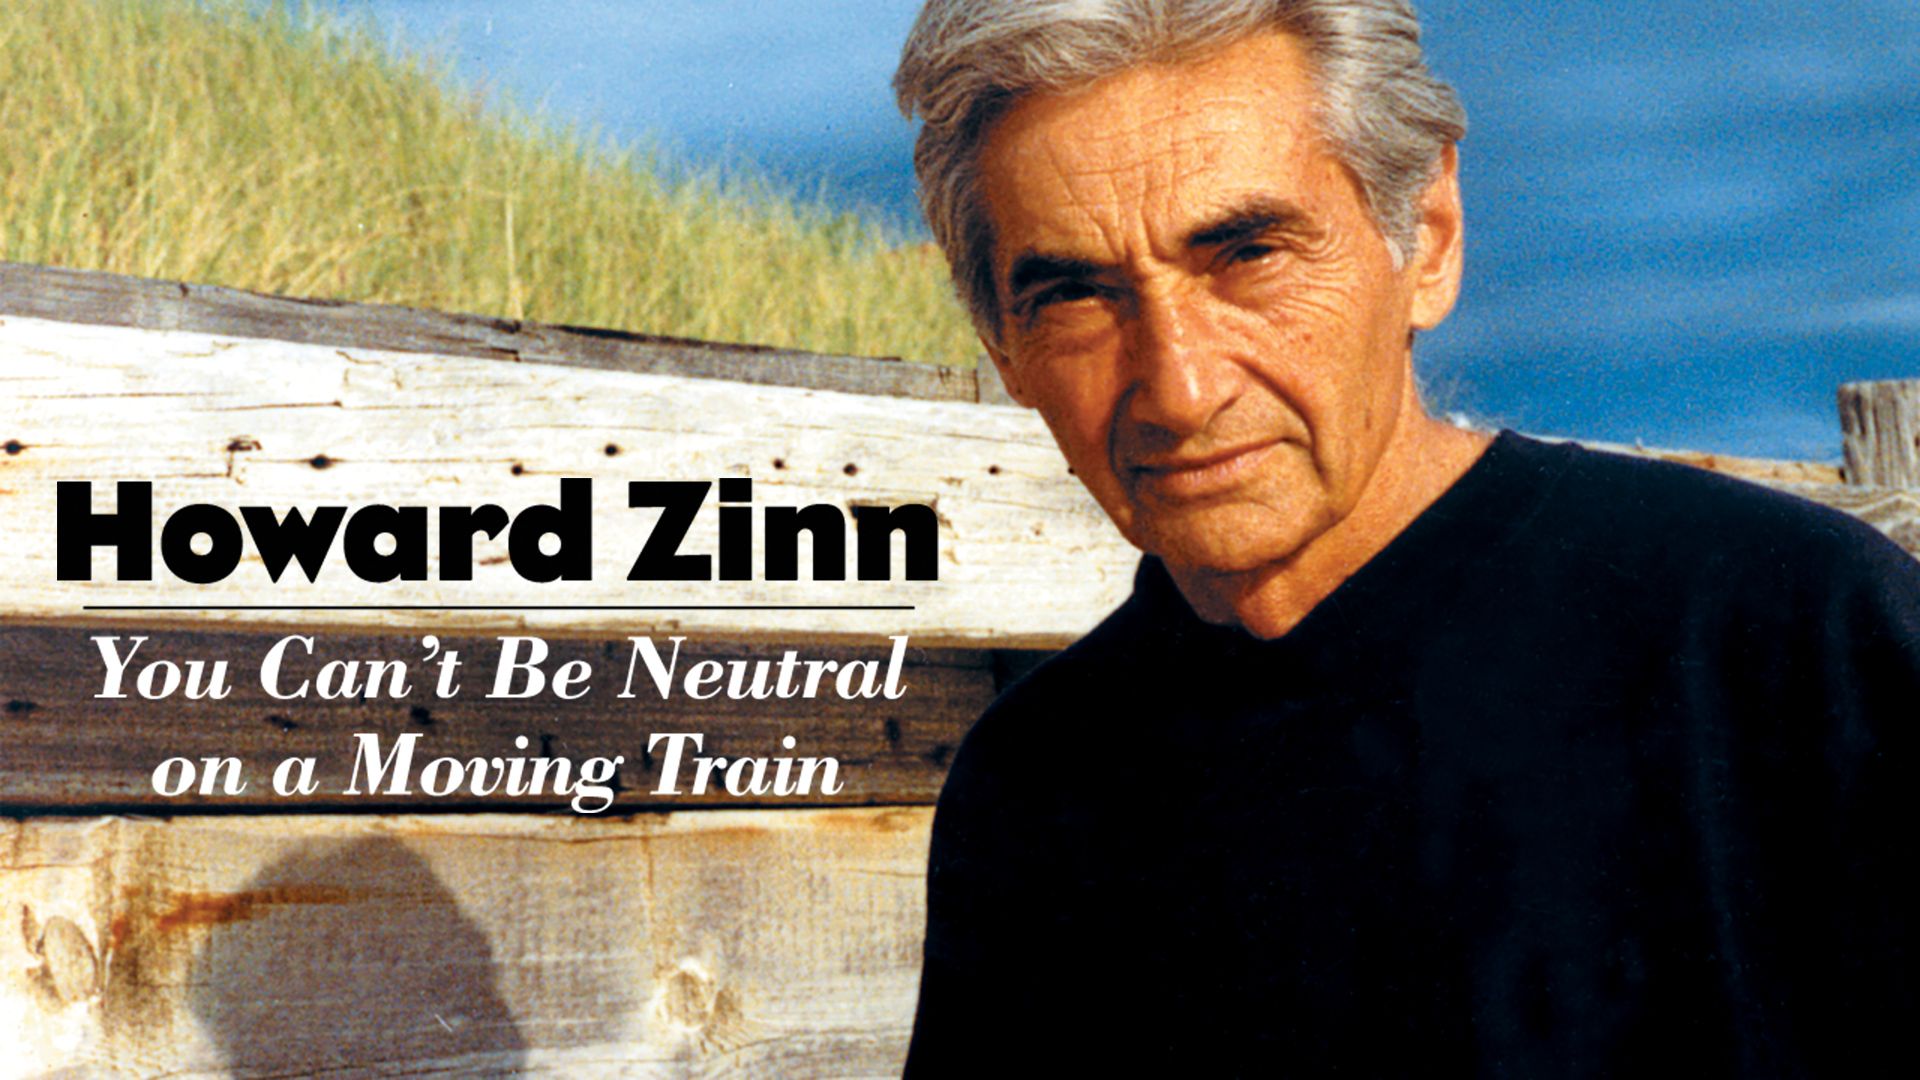 Howard Zinn: You Can't Be Neutral on a Moving Train Backdrop